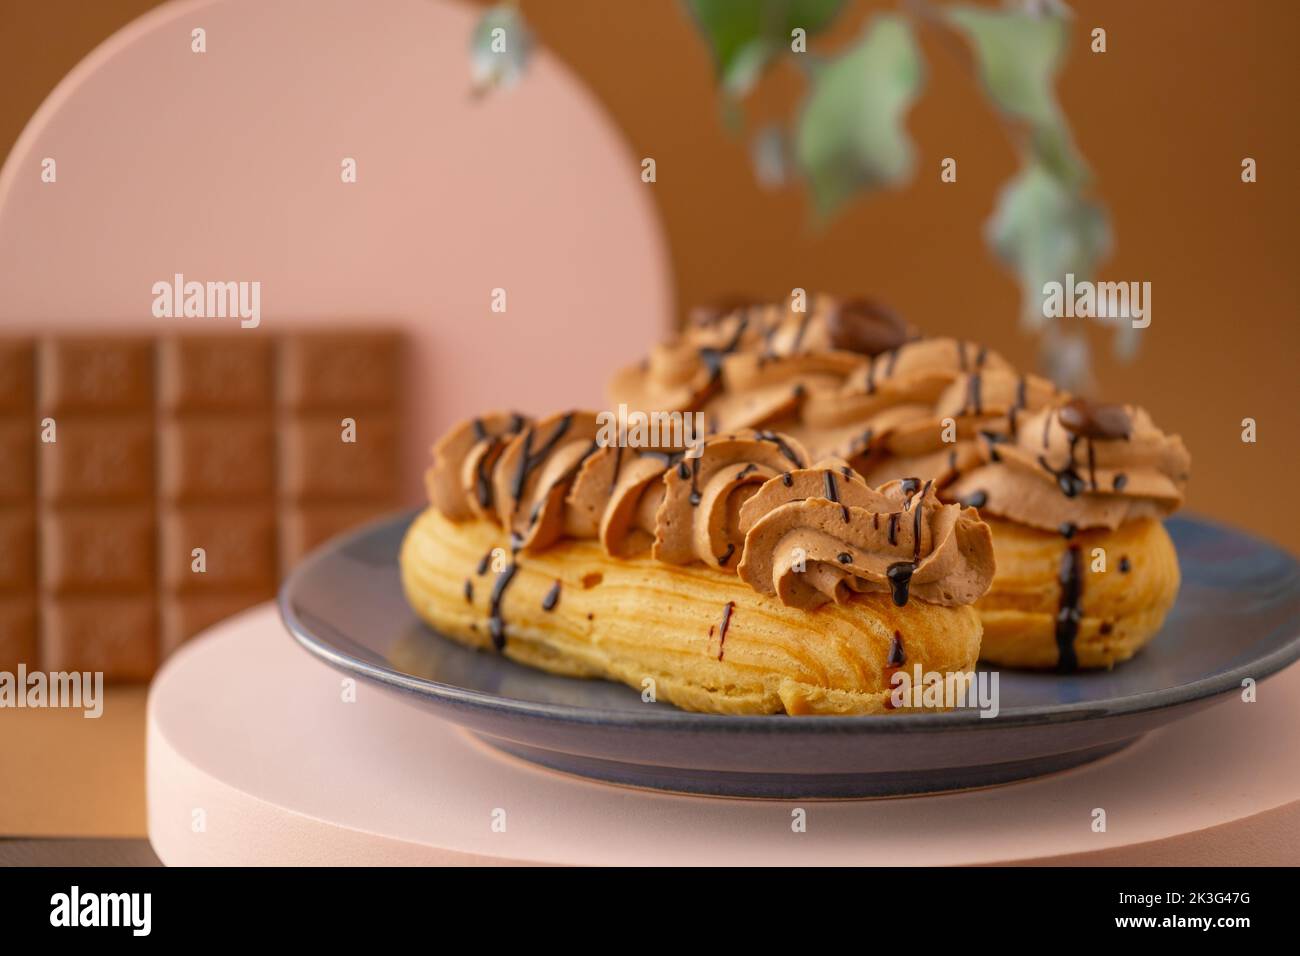 Eclairs cakes.Custard cakes with chocolate cream and chocolate bar on brown background.Sweets and desserts. Baked goods and desserts.Eclairs cakes. Stock Photo